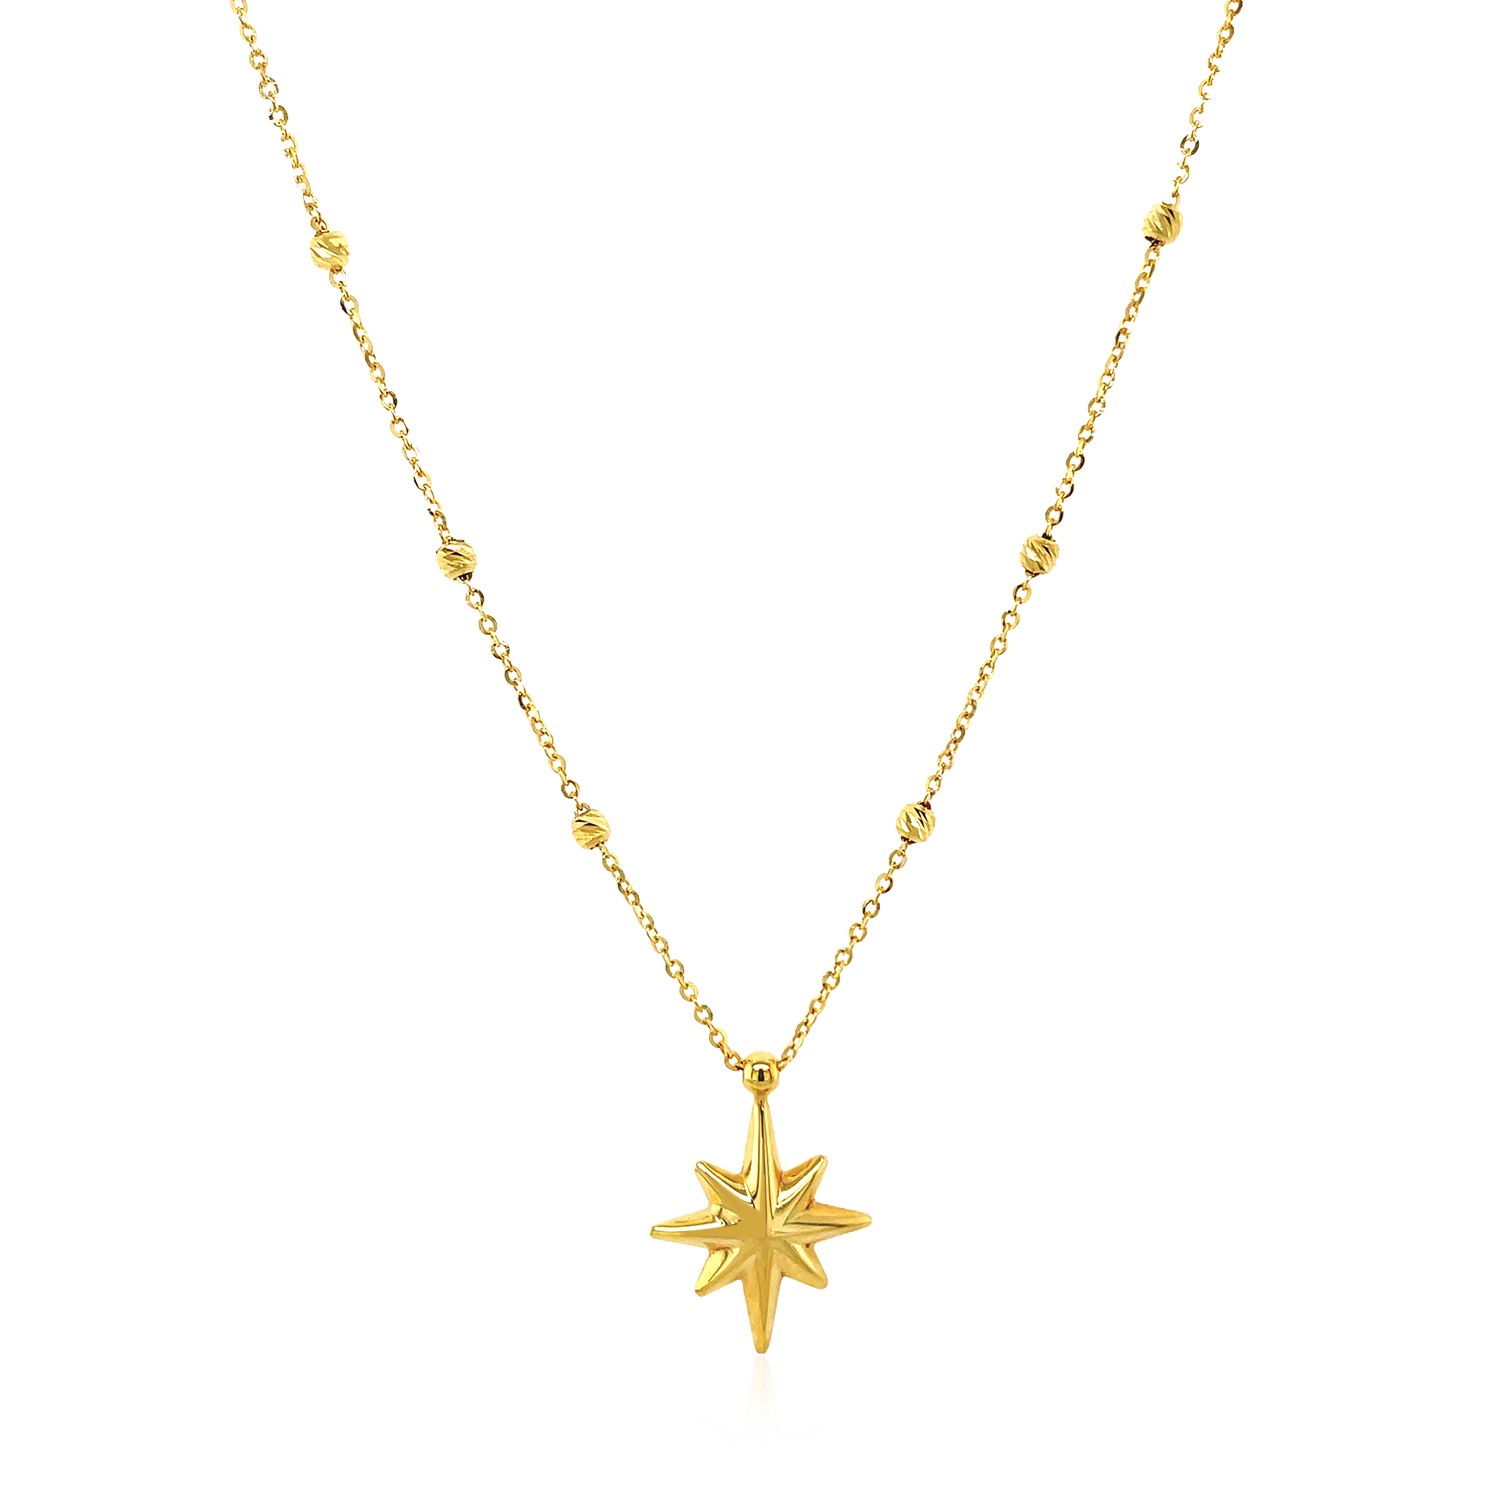 Eight Pointed Star Necklace - Jewelry Online Grau